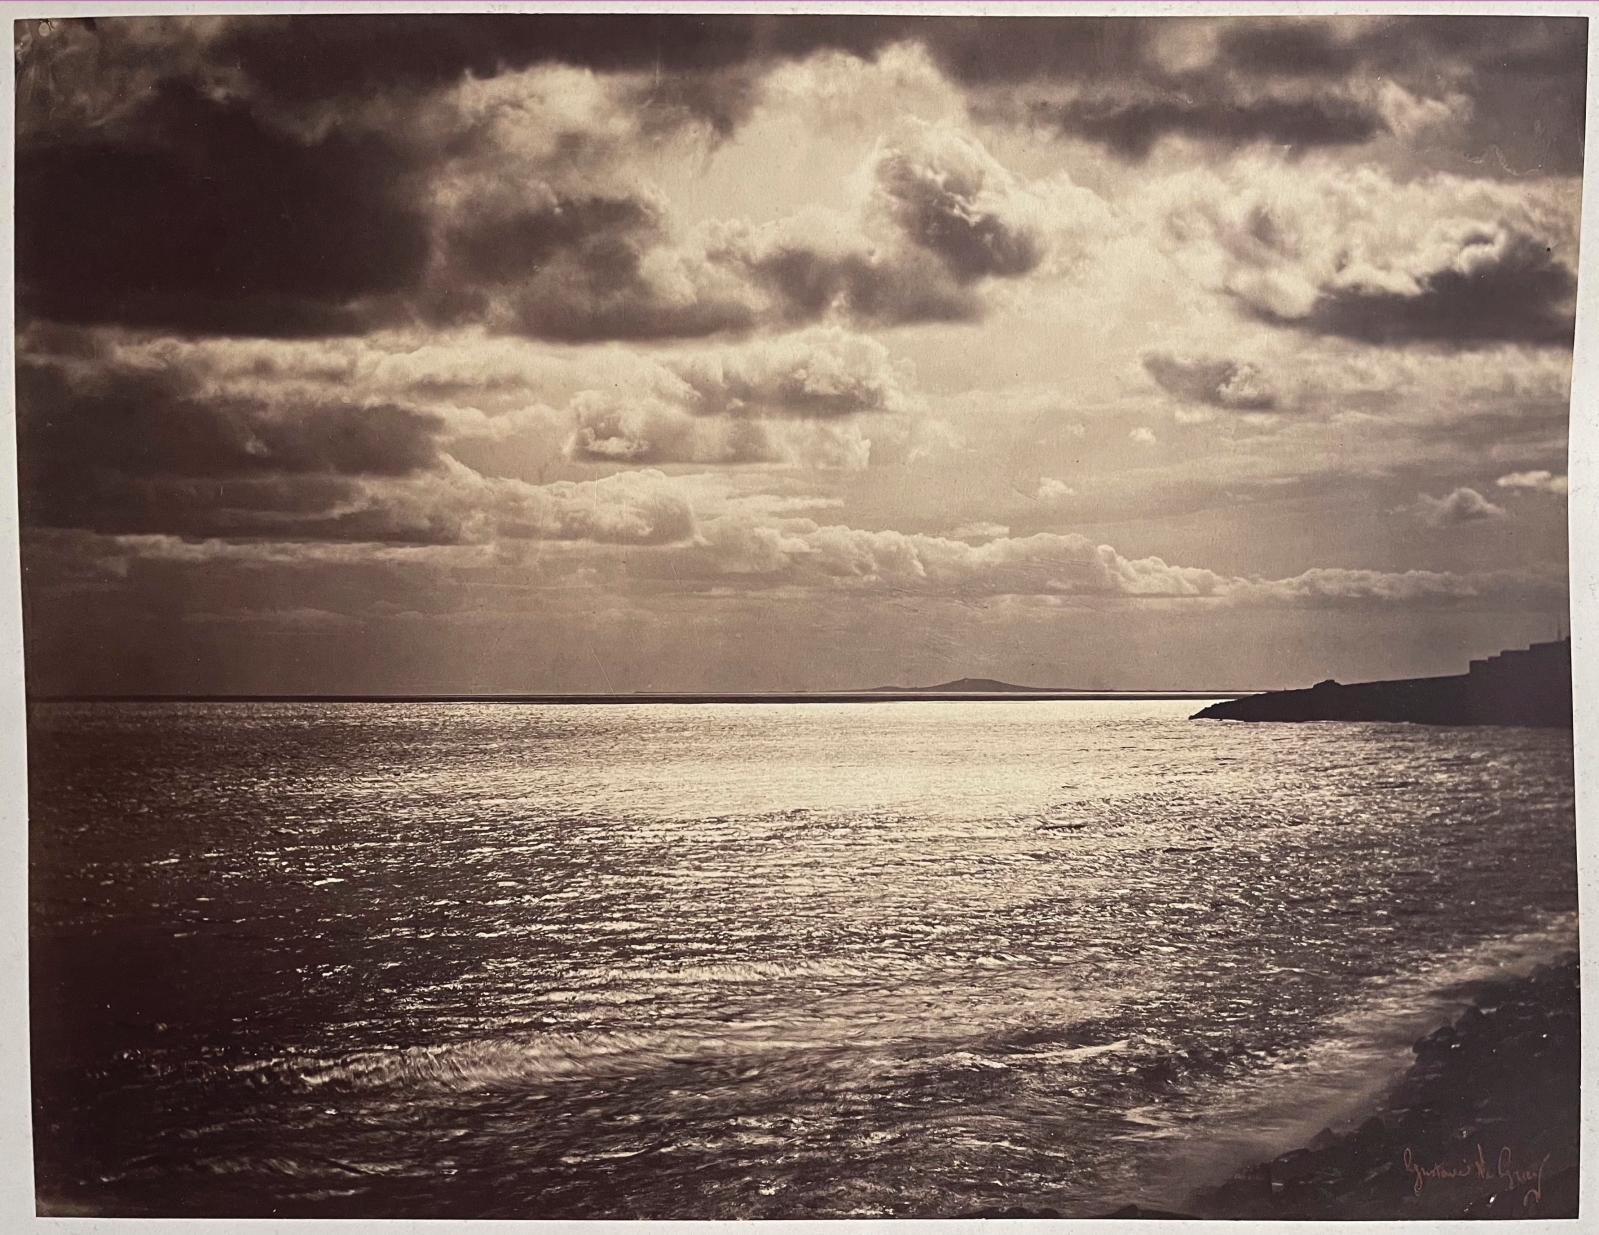 The Mediterranean Sea by Gustave Le Gray